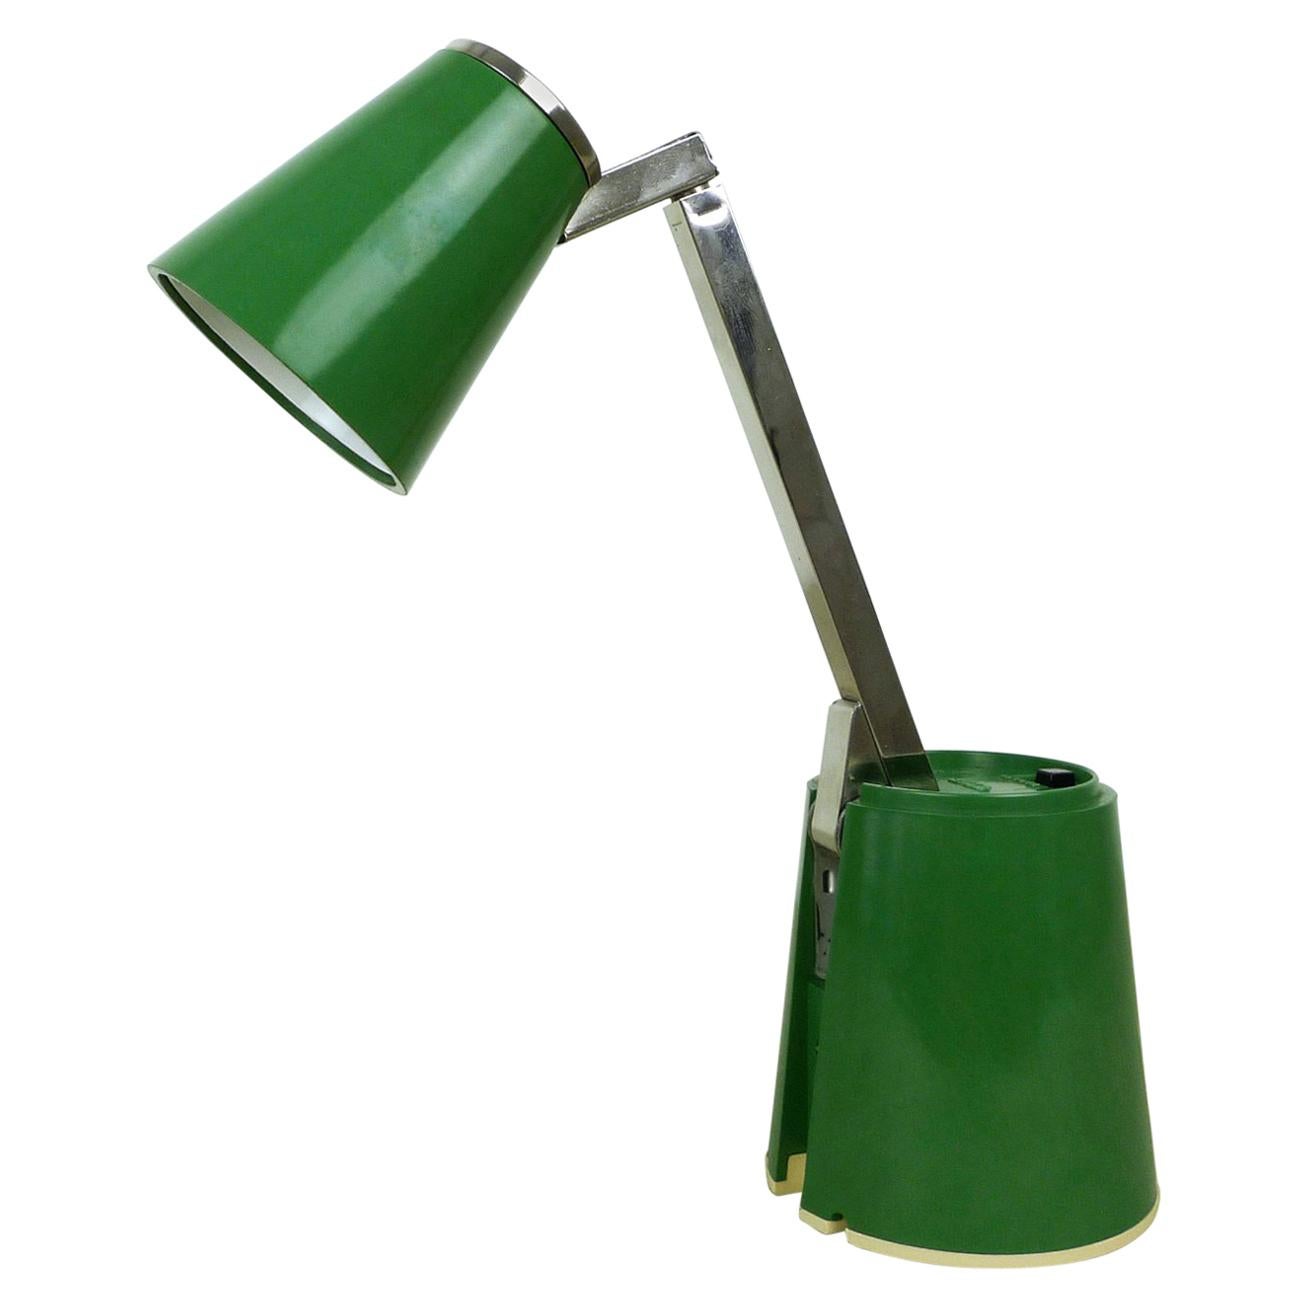 Model Lampette Green Table Lamp from Eichhoff, Germany, 1960s